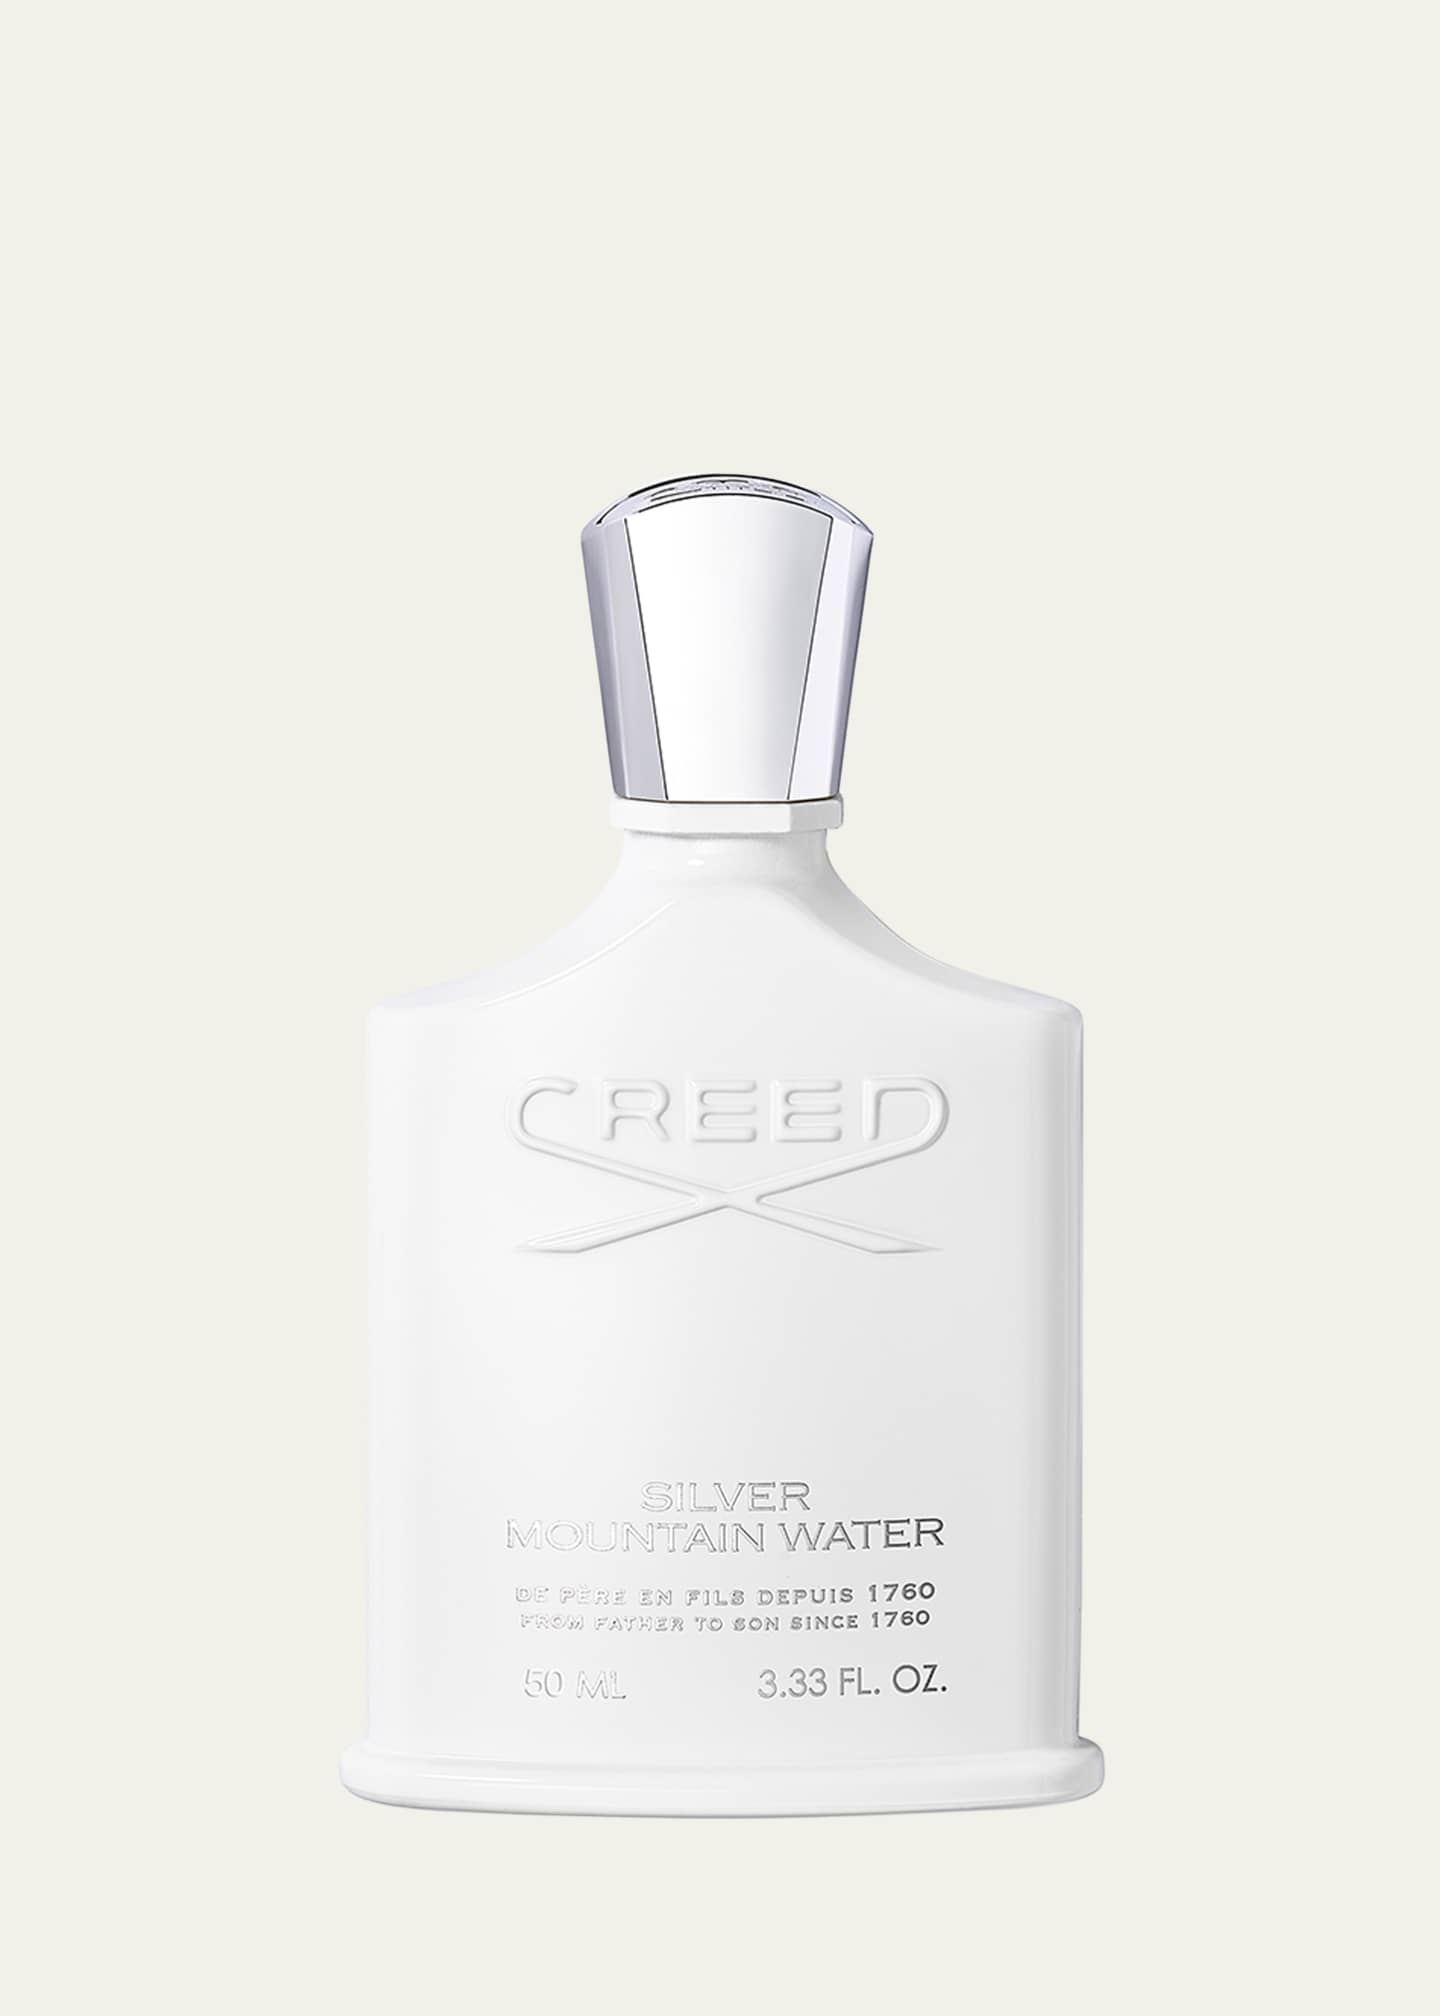 CREED Silver Mountain Water, 1.7 oz./ 50 mL Image 1 of 2